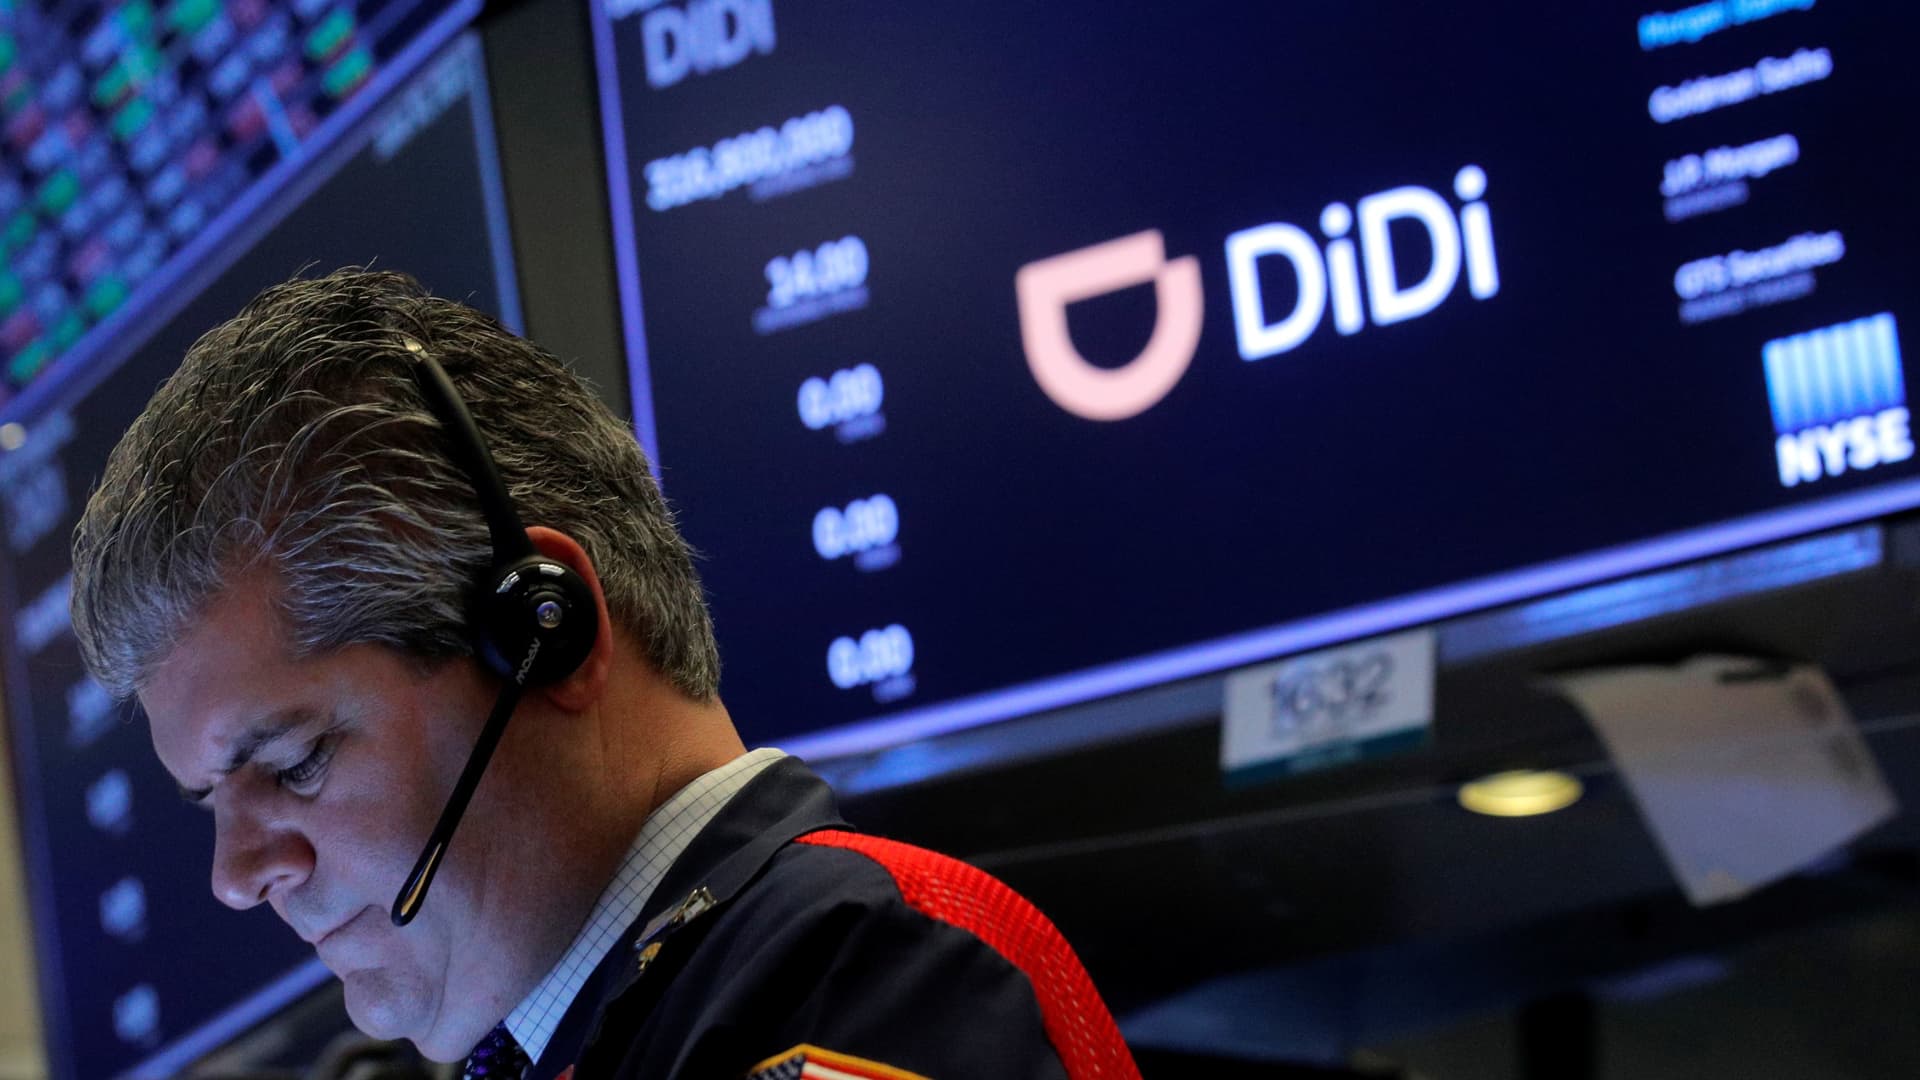 A trader works during the IPO for Chinese ride-hailing company Didi Global Inc on the New York Stock Exchange (NYSE) floor in New York City, U.S., June 30, 2021.